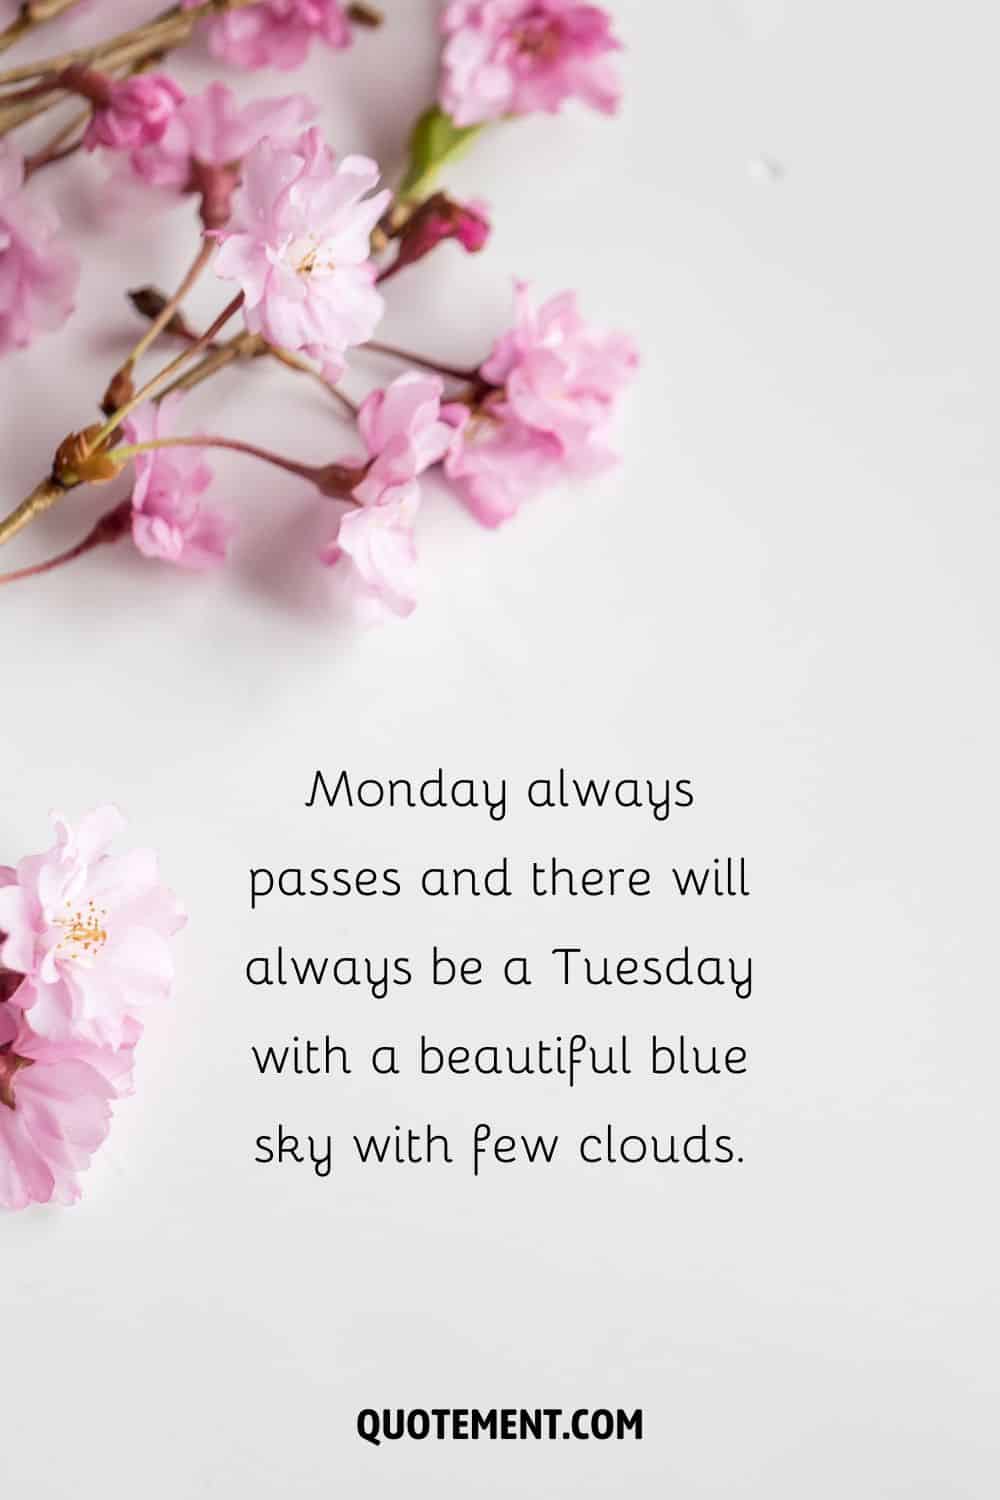 “Monday always passes and there will always be a Tuesday with a beautiful blue sky with few clouds.” — Unknown